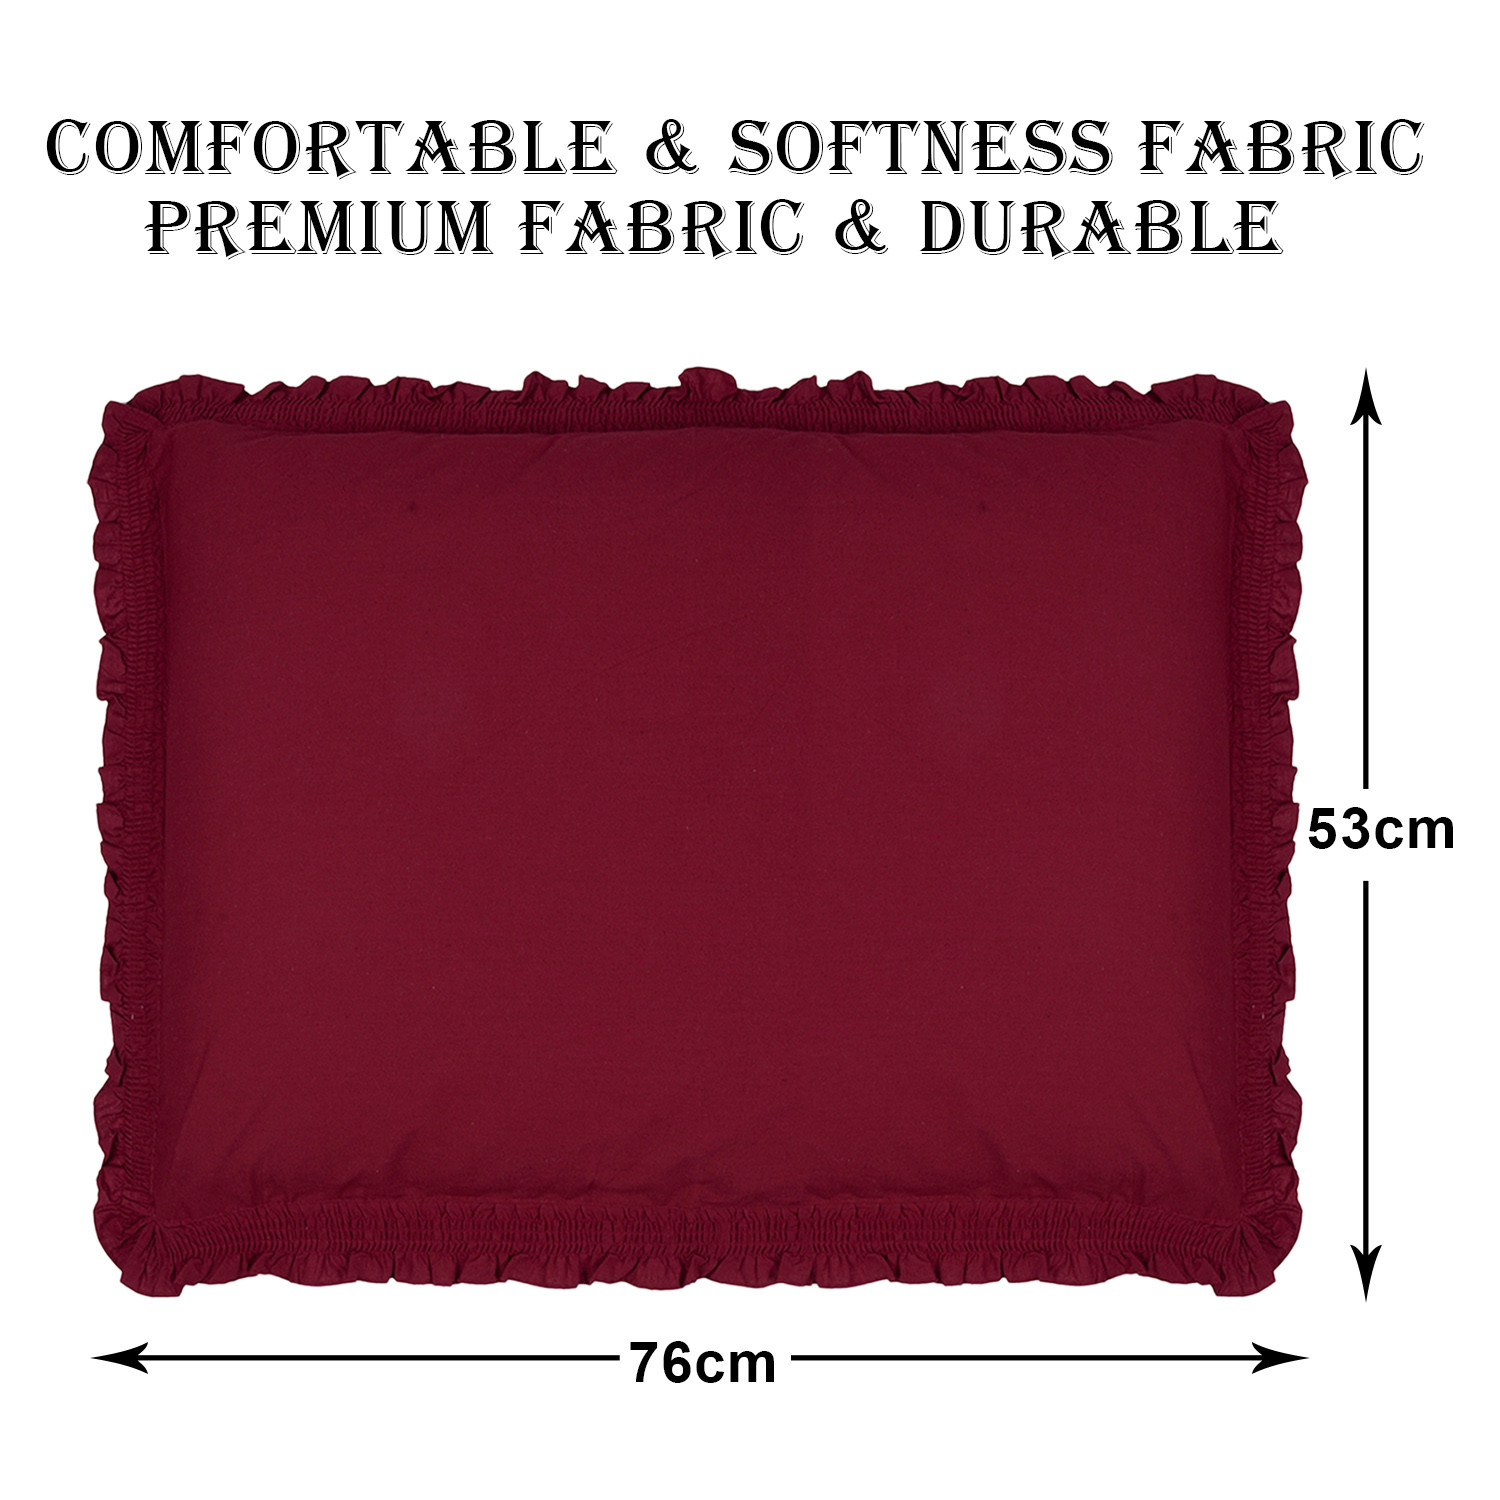 Kuber Industries Pillow Cover | Cotton Pillow Cover | Pillow Cover For Bedroom | Pleated Frill Border Long Crush Pillow Cover | Set of 2 | 20x30 Inch | Maroon